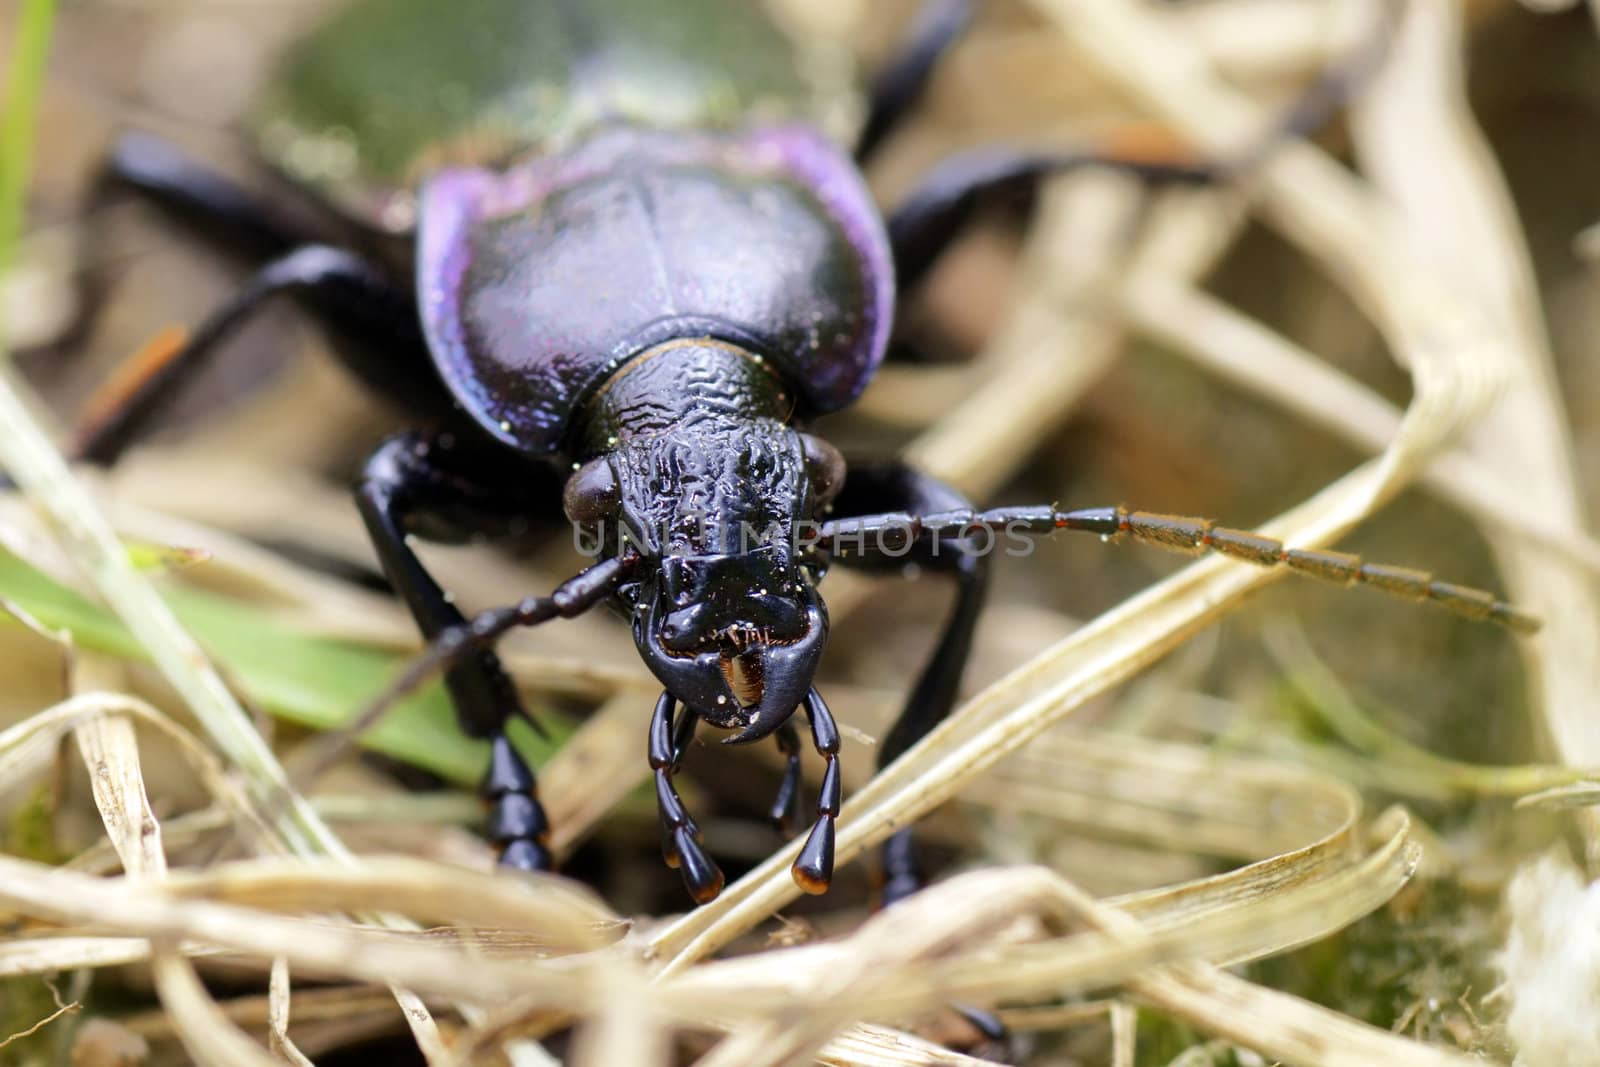 Purple-rimmed beetle looking at Camera by Mirage3